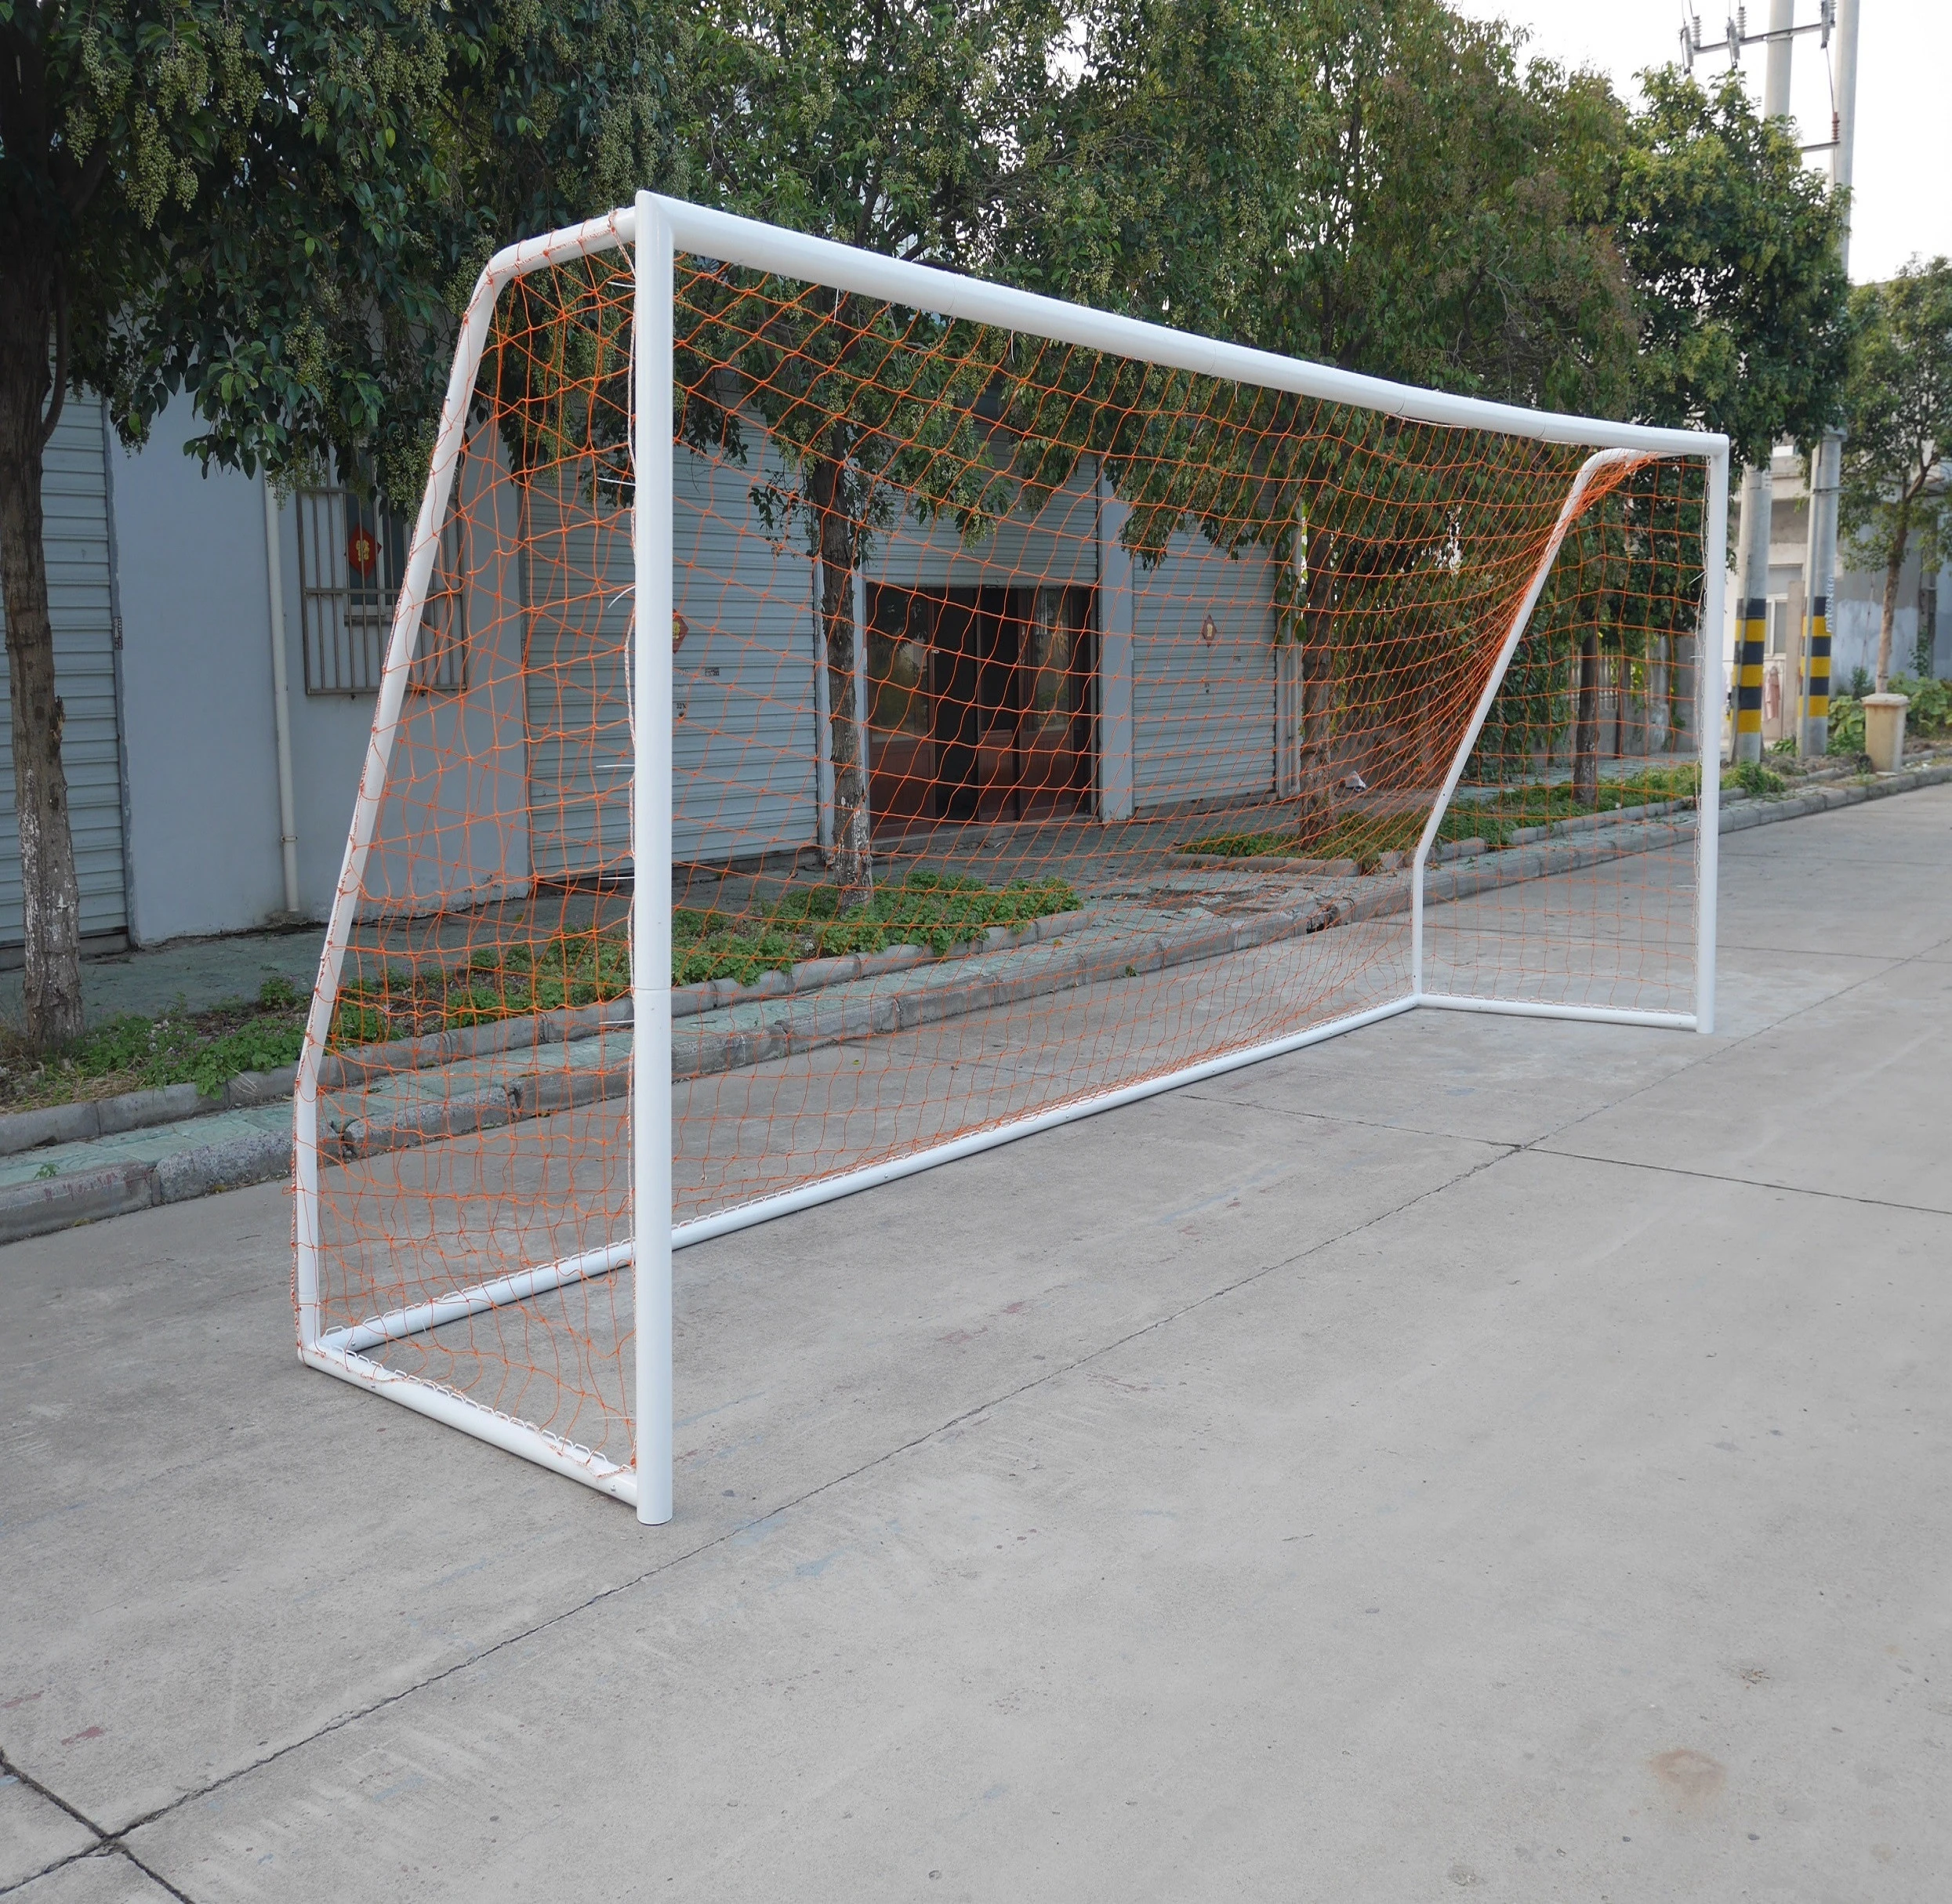 XY-G300D Hot Sale New Design 10ft x 6.5ft Full size Popular Foldable Metal assemble football soccer goal post with Net